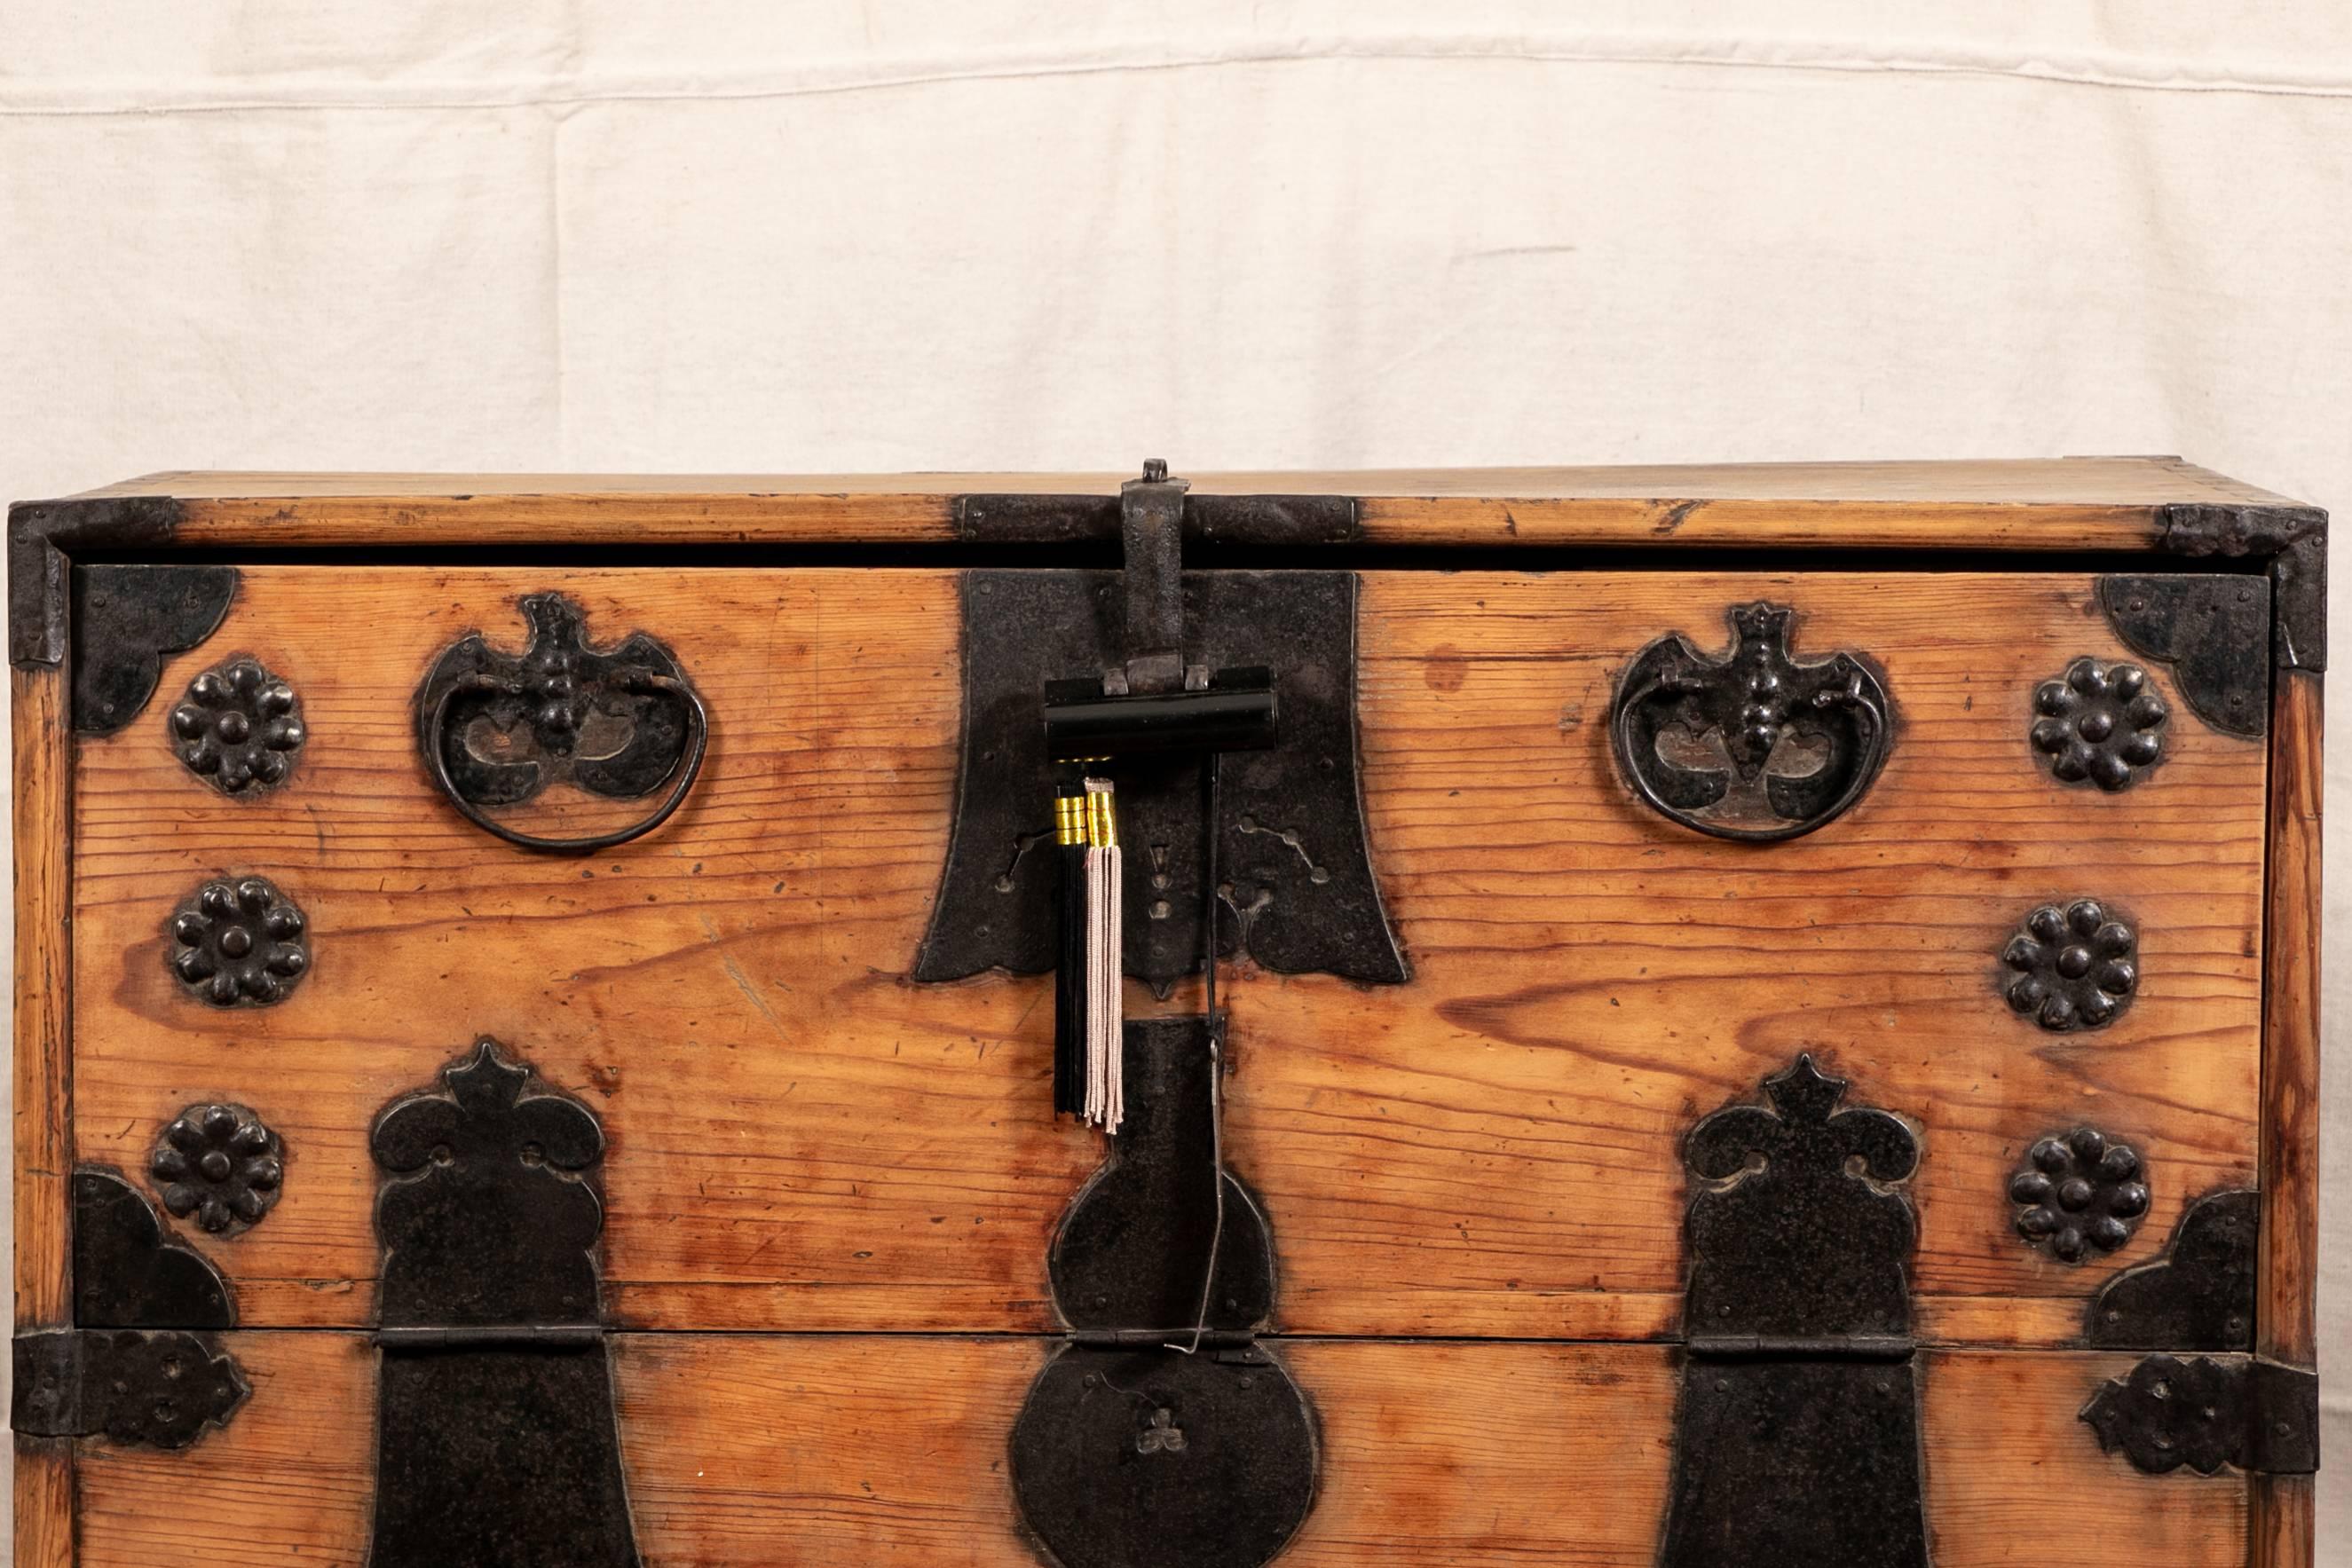 Antique wooden Korean chest, slant front opens to three short drawers with tab pulls over a deep storage compartment, decorative black painted iron hardware, hinges, pulls and a compartmental lock with carry handles on the sides. 

Condition: